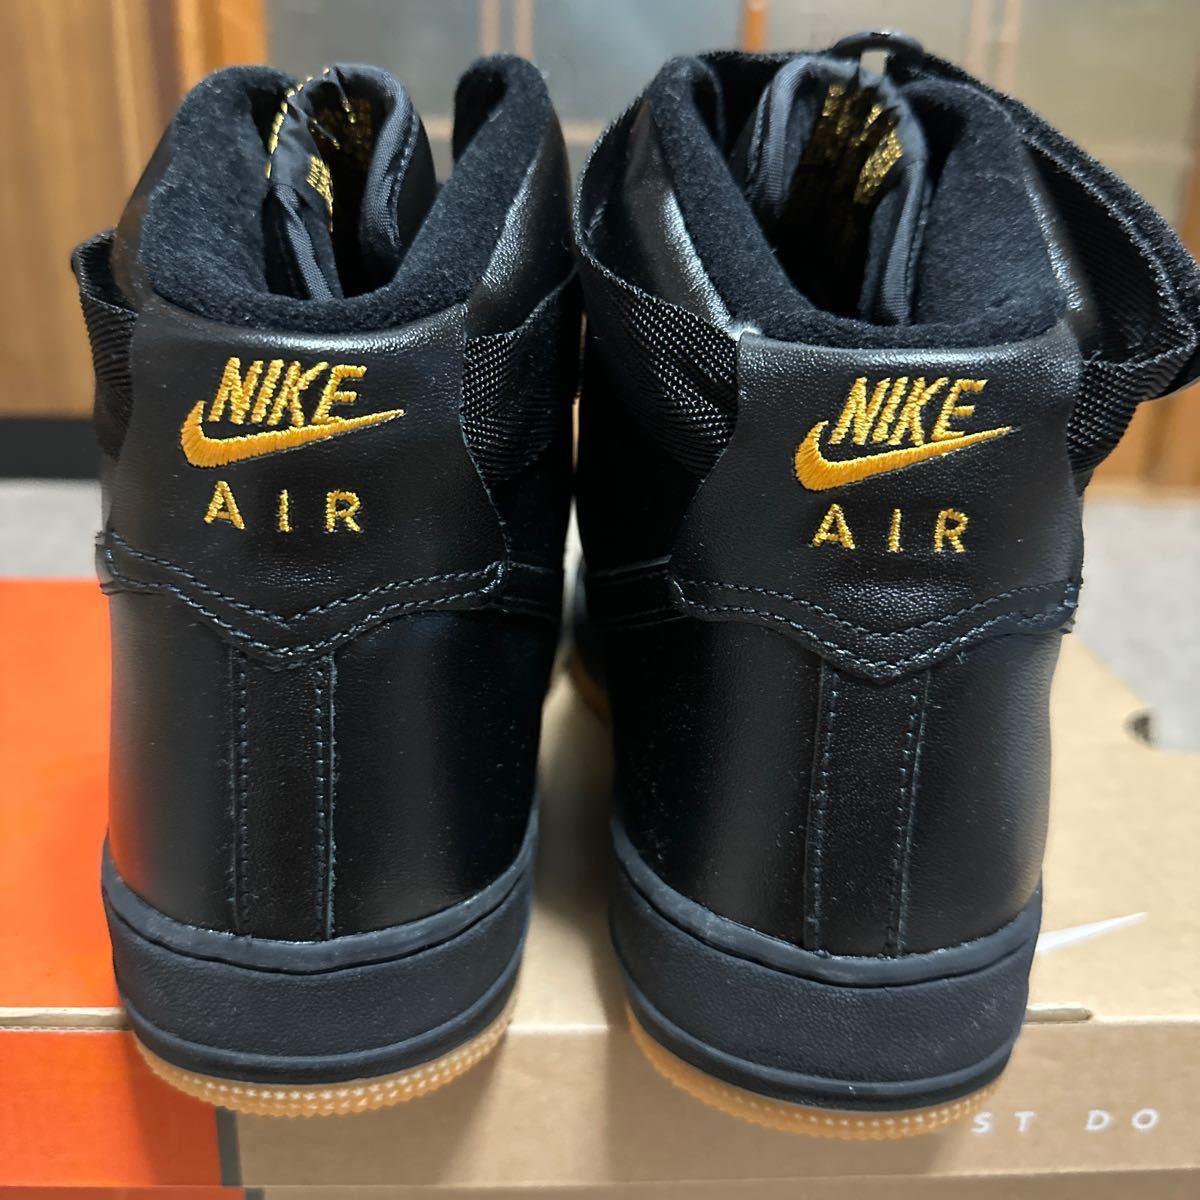 NIKE AIR FORCE 1 HIGH US 11(CM 29) Nike Air Force 2003 year that time thing finest quality 001